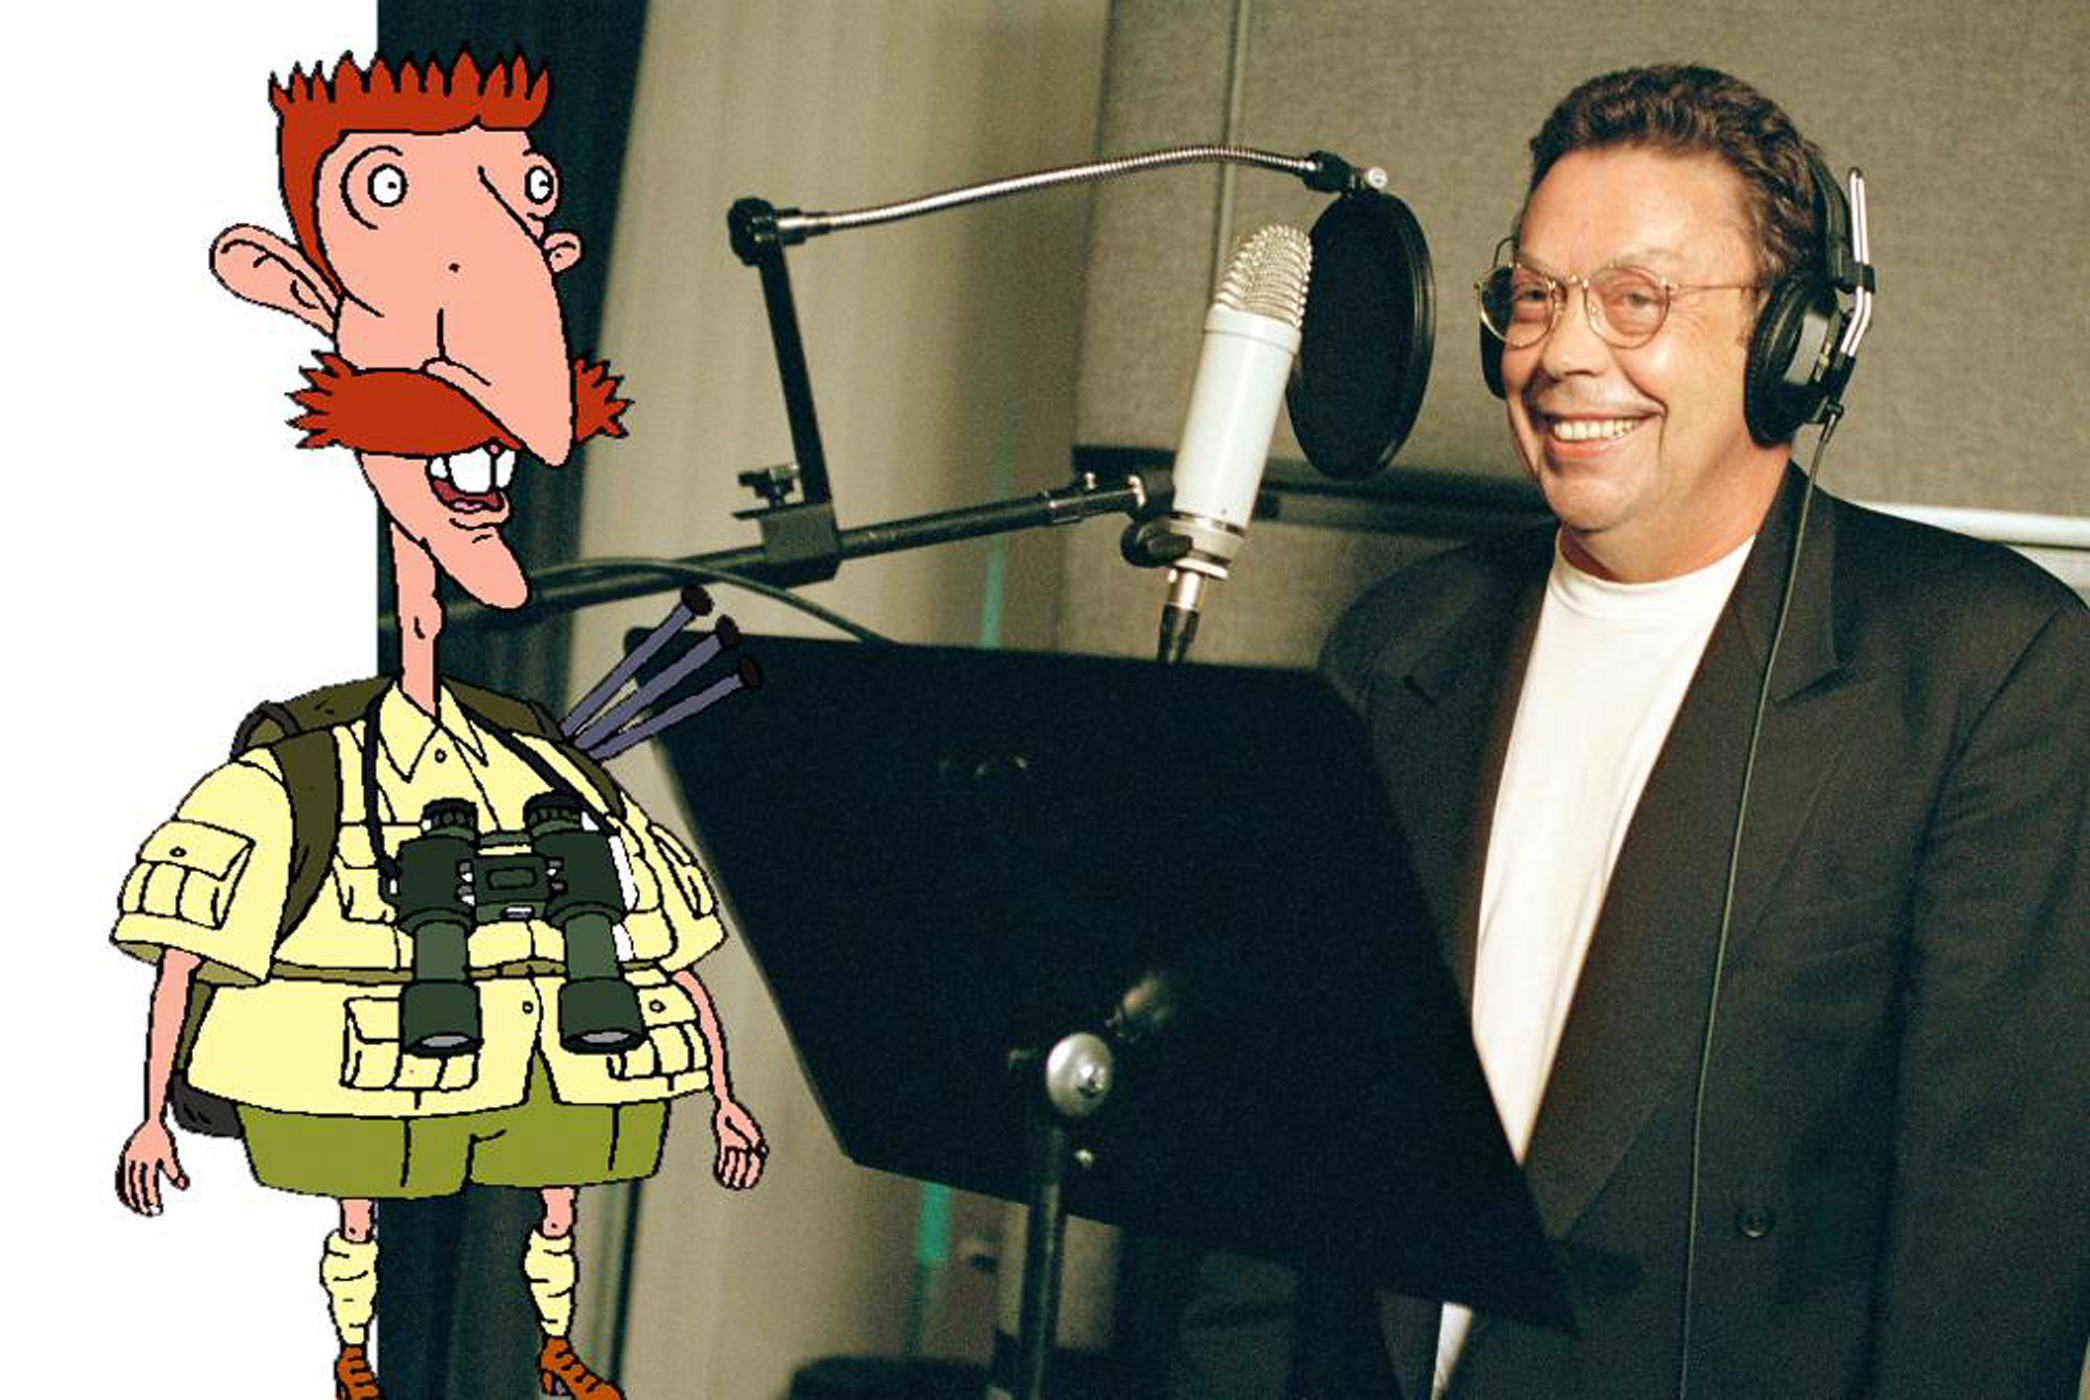 Tim Curry lent his comedic talents to voice the eccentric Nigel Thornberry for five seasons of Nickelodeon’s The Wild Thornberrys.